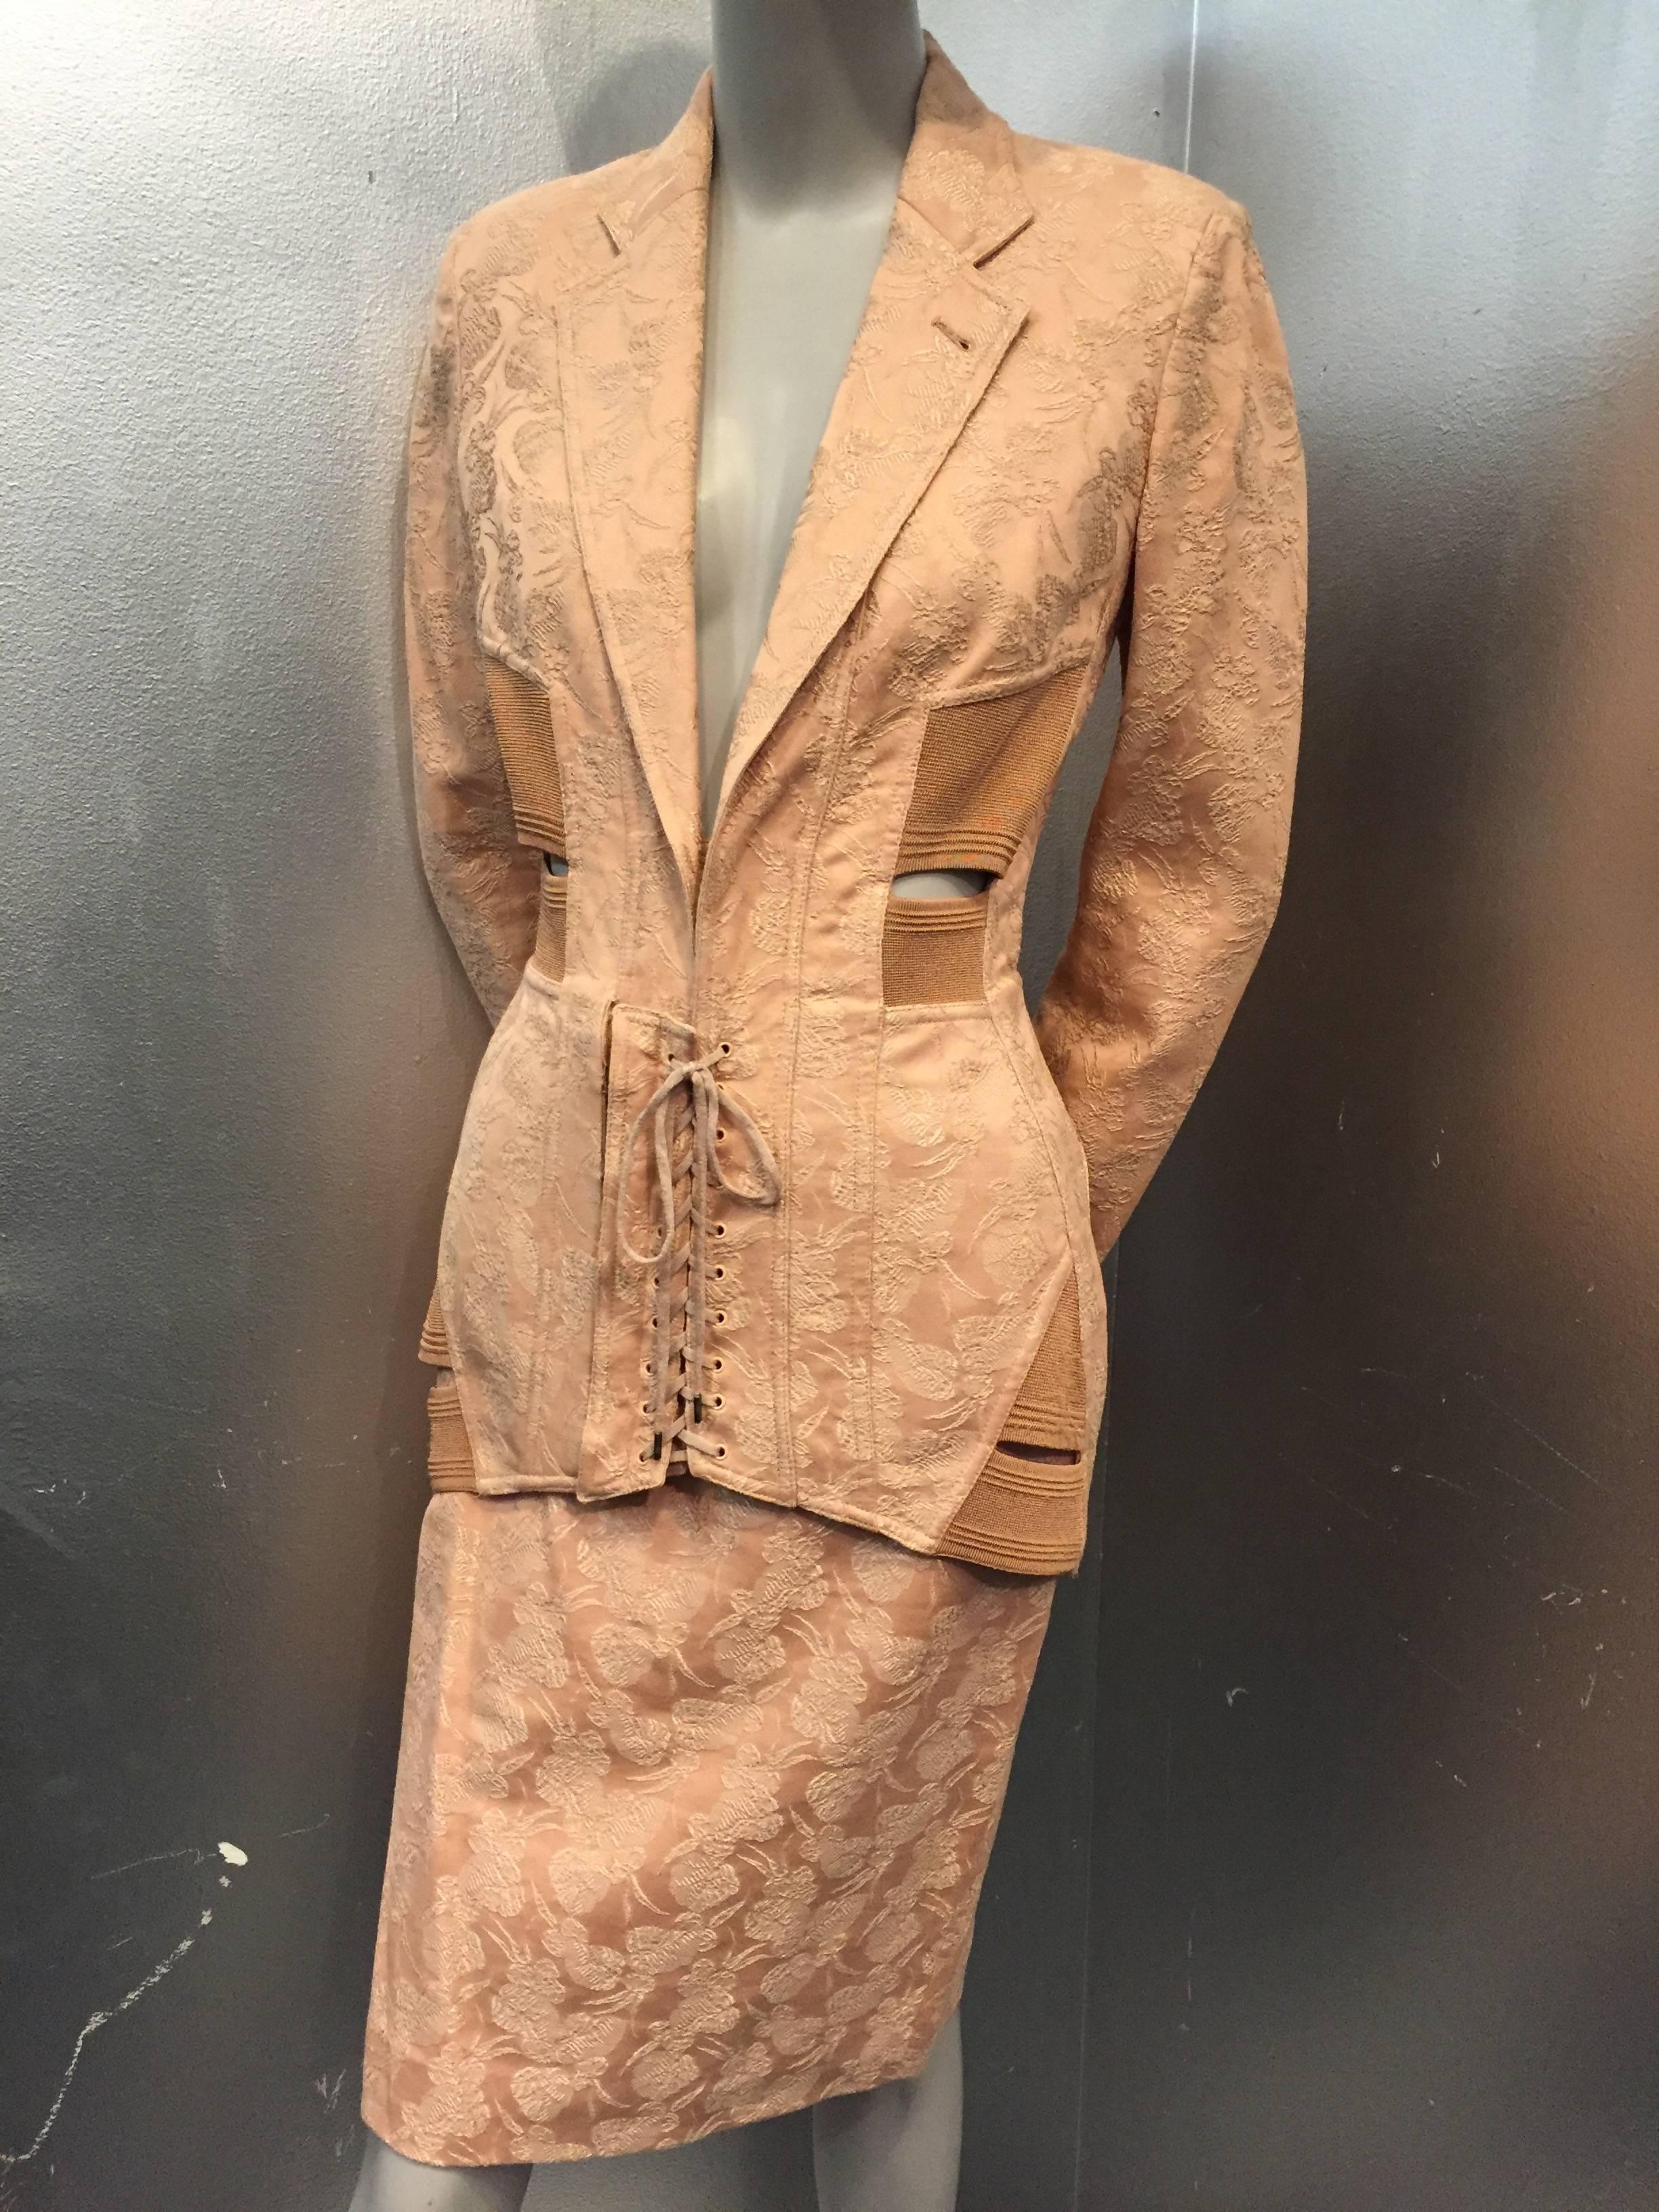 Beige 1980s Iconic Jean Paul Gaultier Peach Jacquard Corset-Inspired Skirt Suit